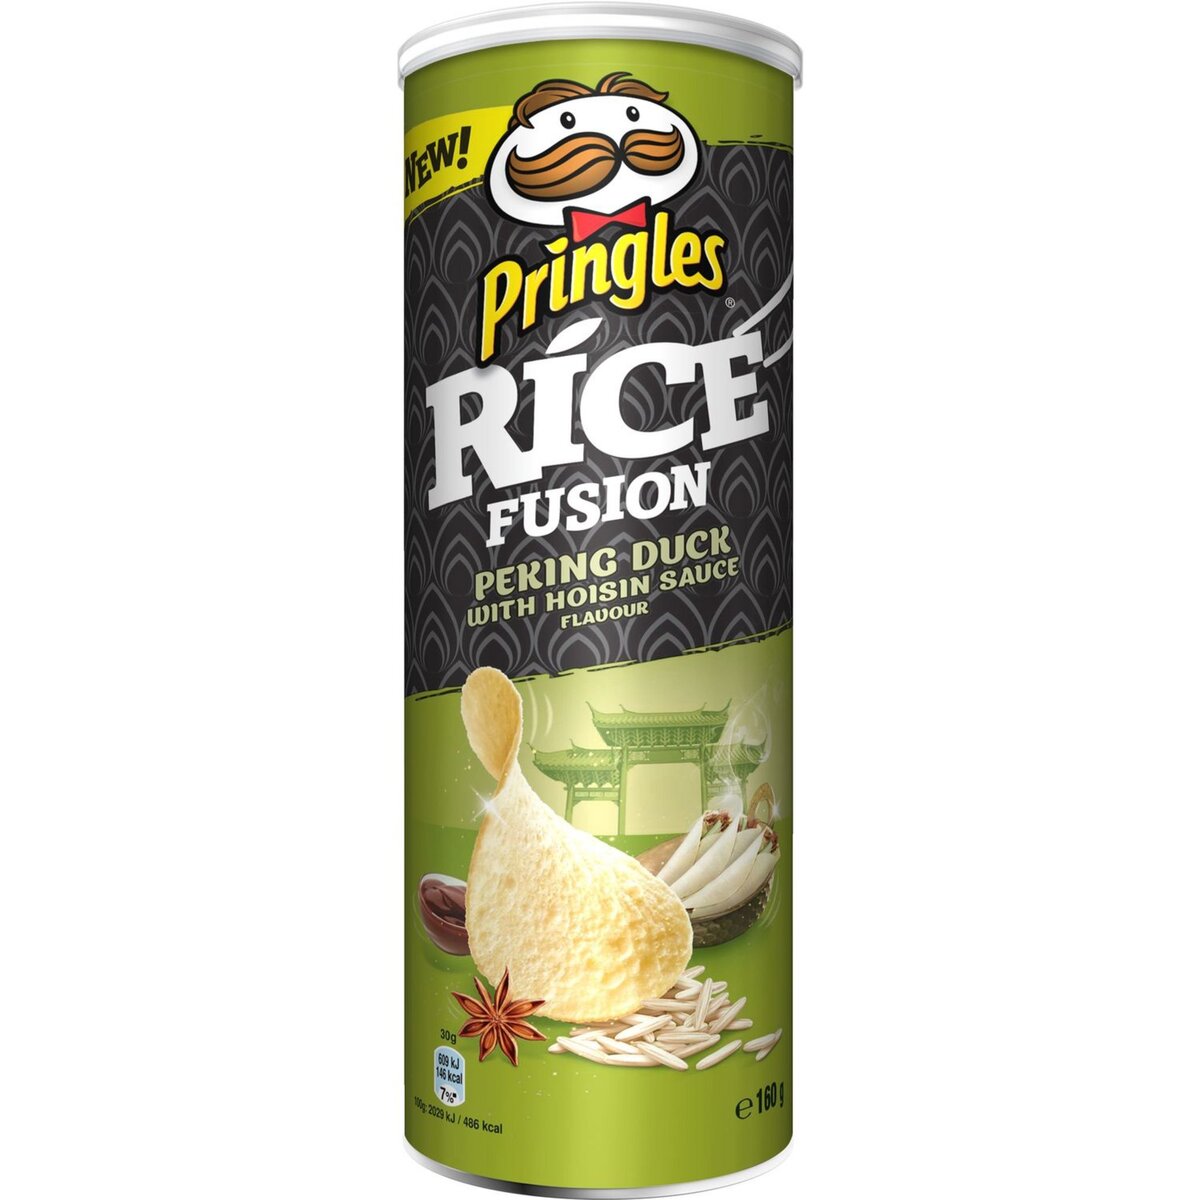 PRINGLES Chips tuiles rice fusion canard laqué 160g